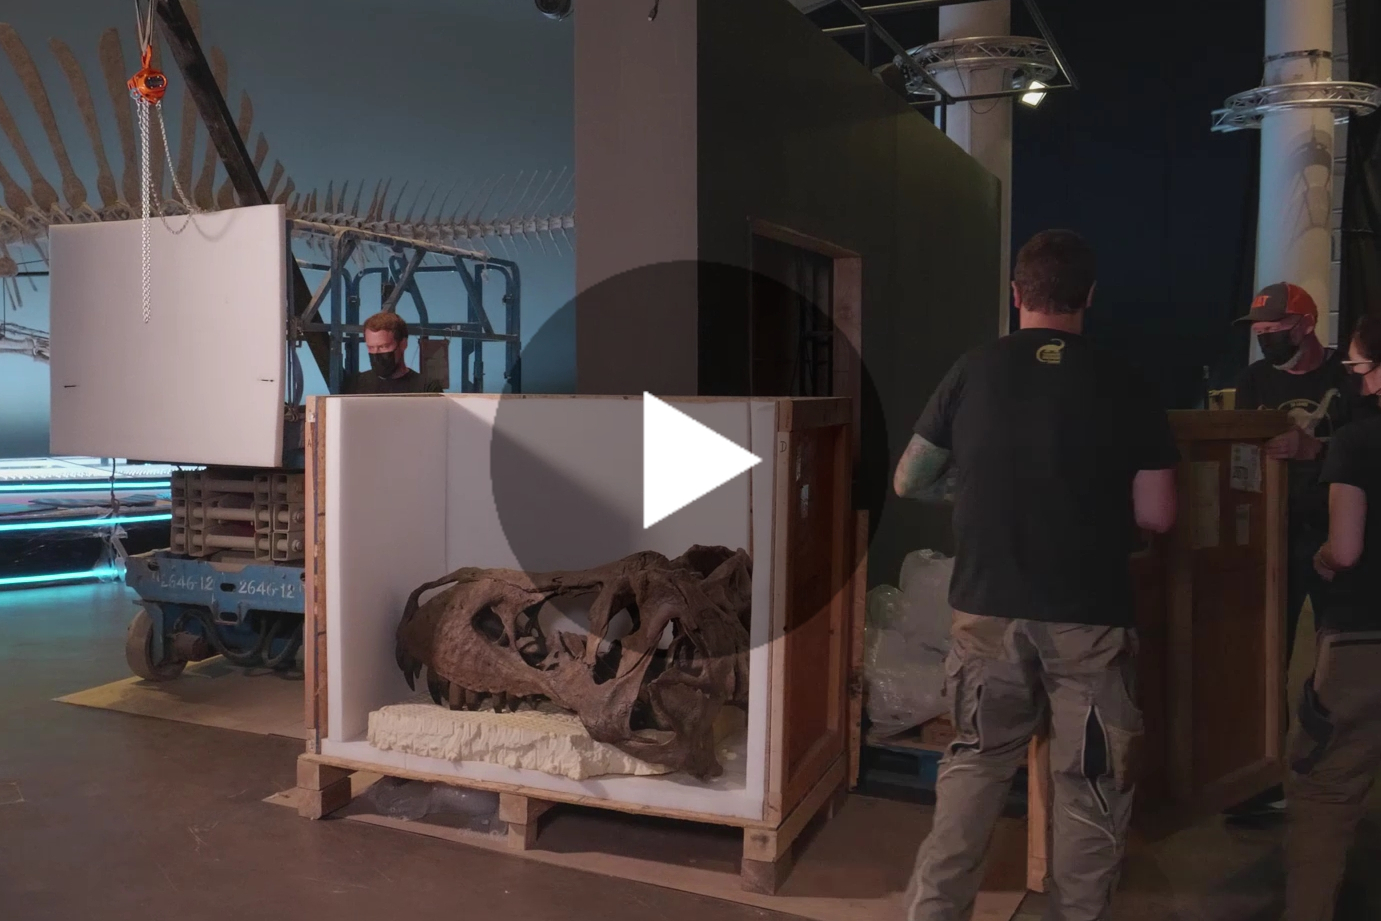 Curation behind the Dinosaurs